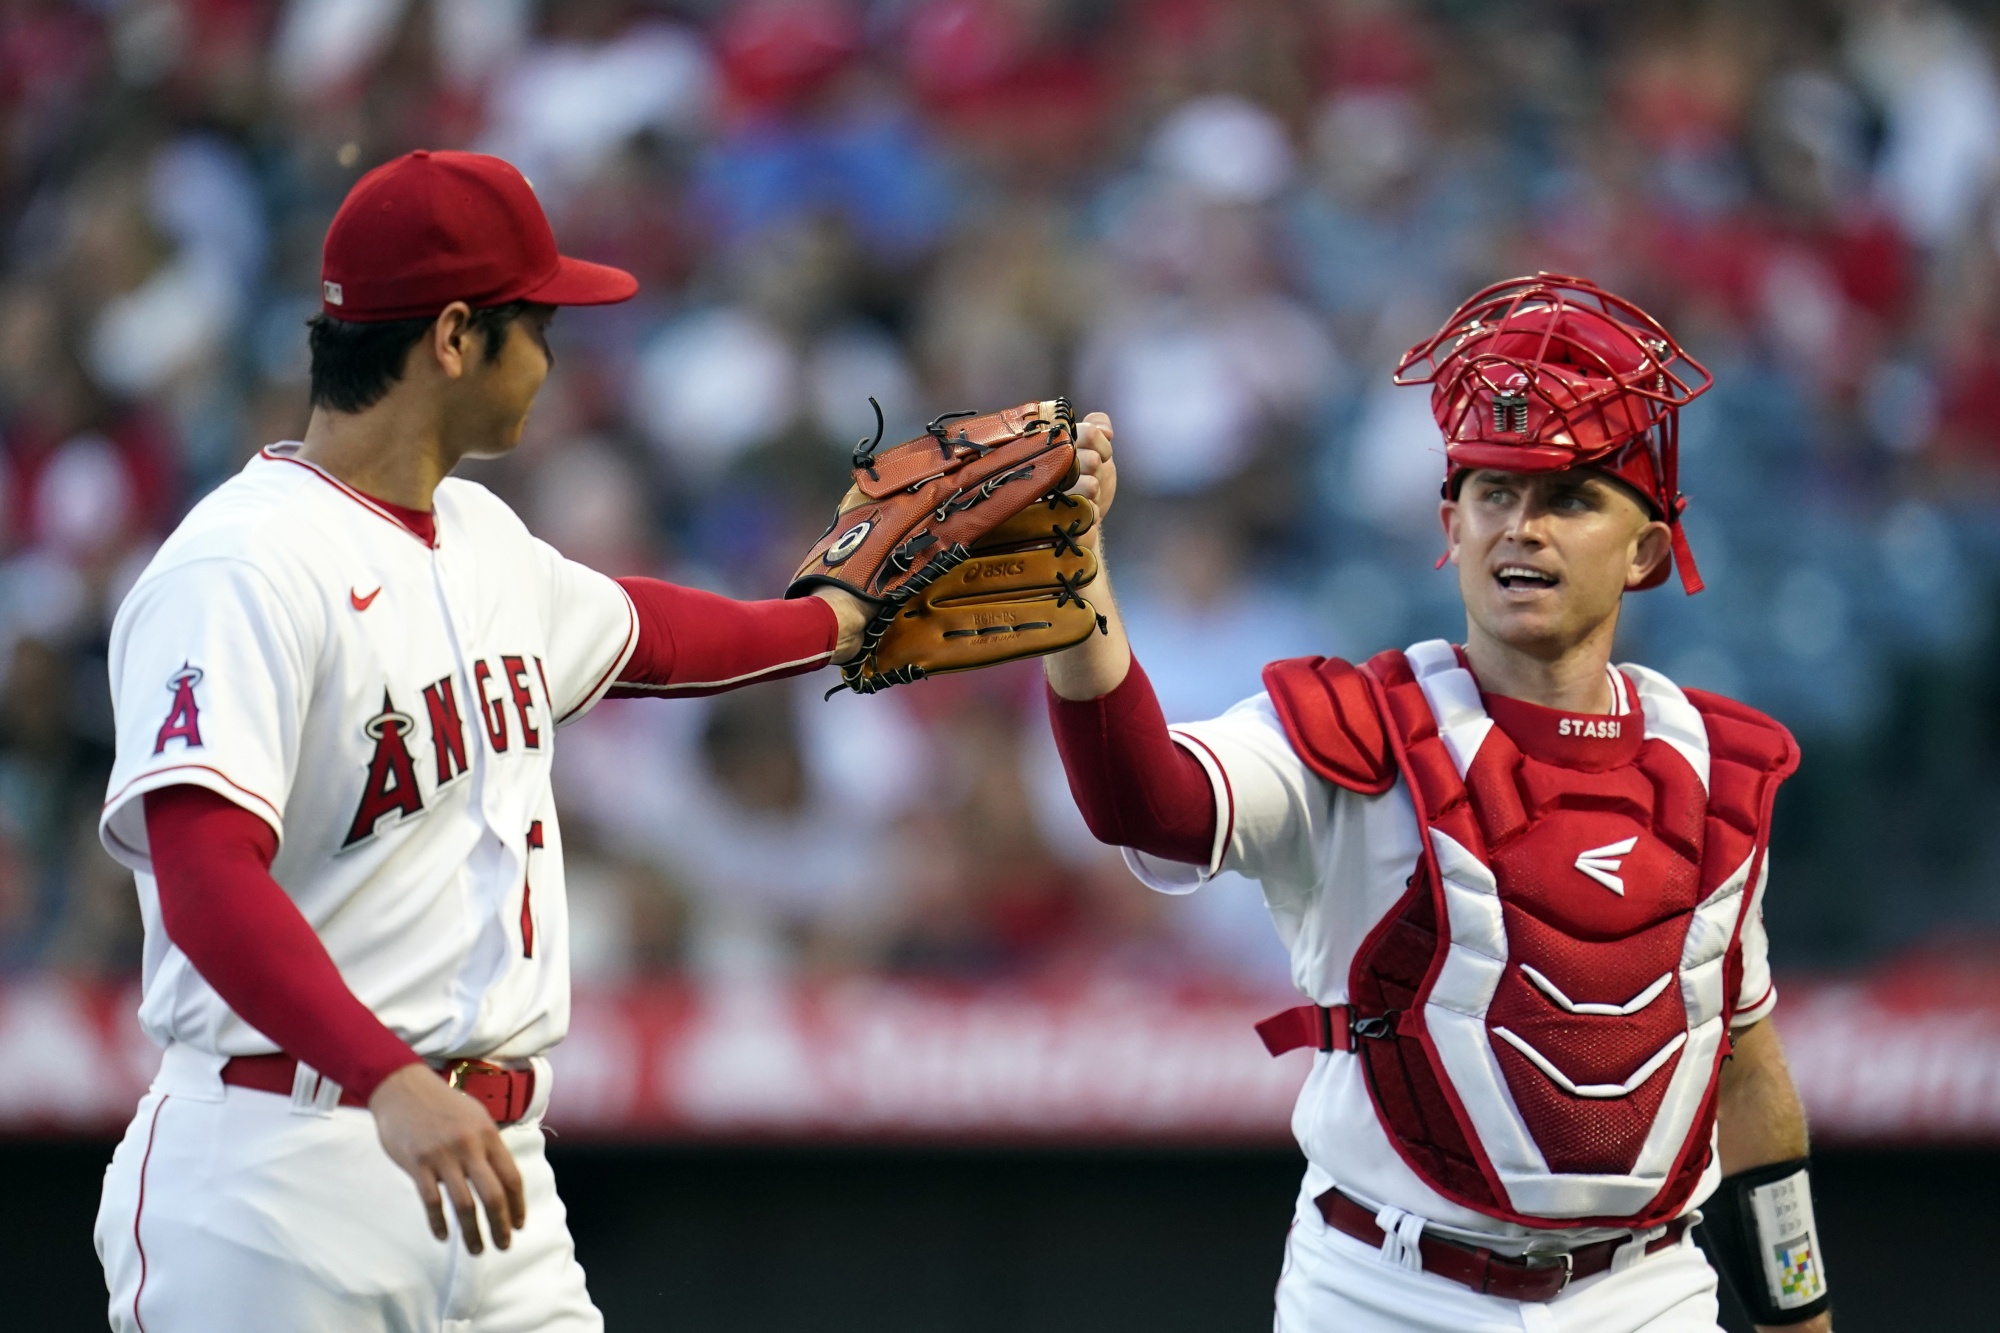 Luis Castillo, Shohei Ohtani to face off Friday, but only for